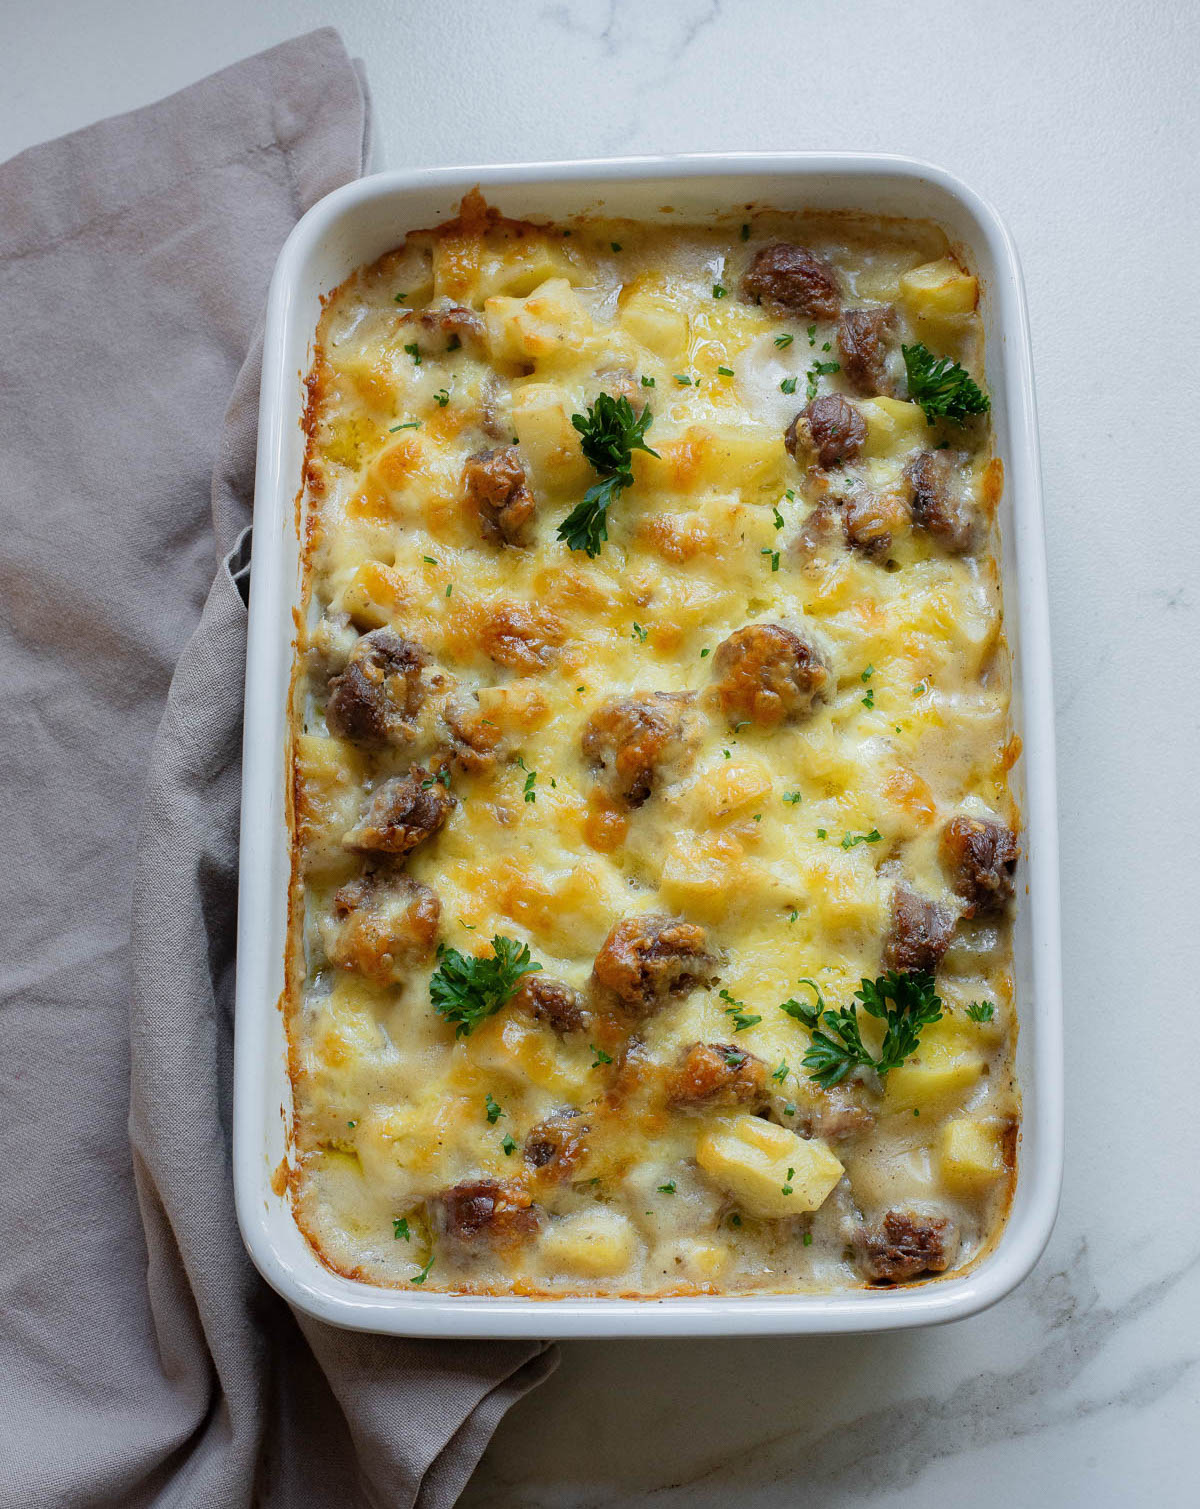 Cheese potato and smoked sausage casserole in a white dish.